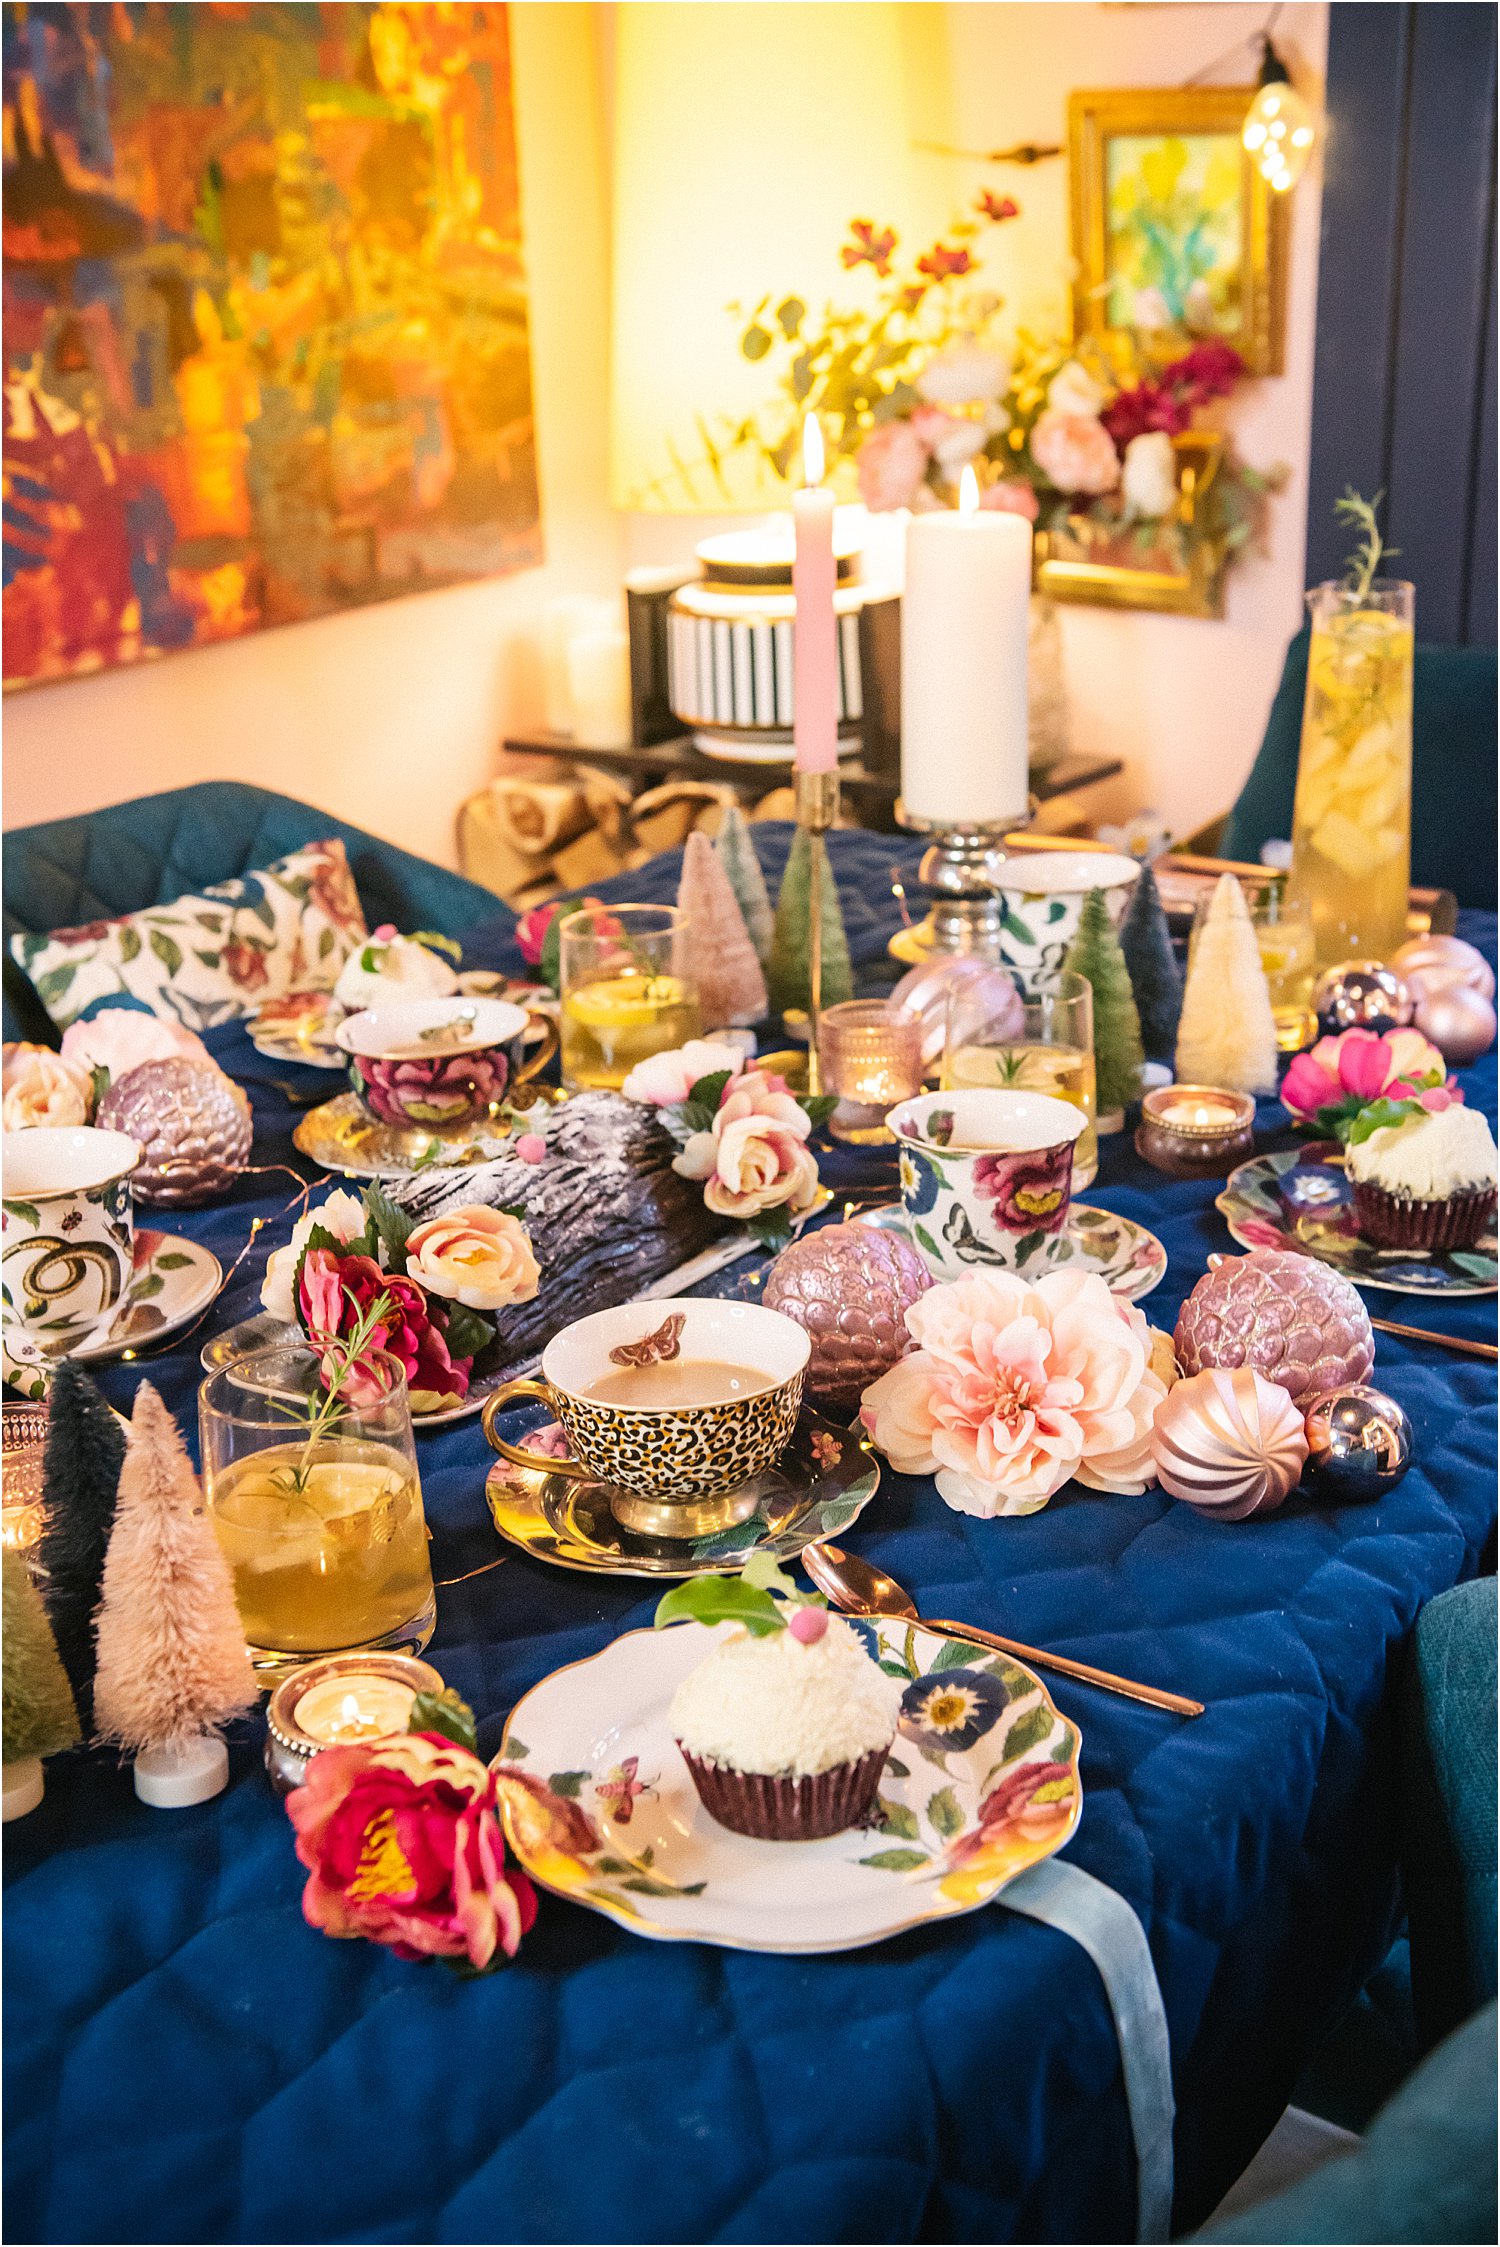 10-Christmas-table-setting-ideas-floral-pink-blue-lily-sawyer-photo